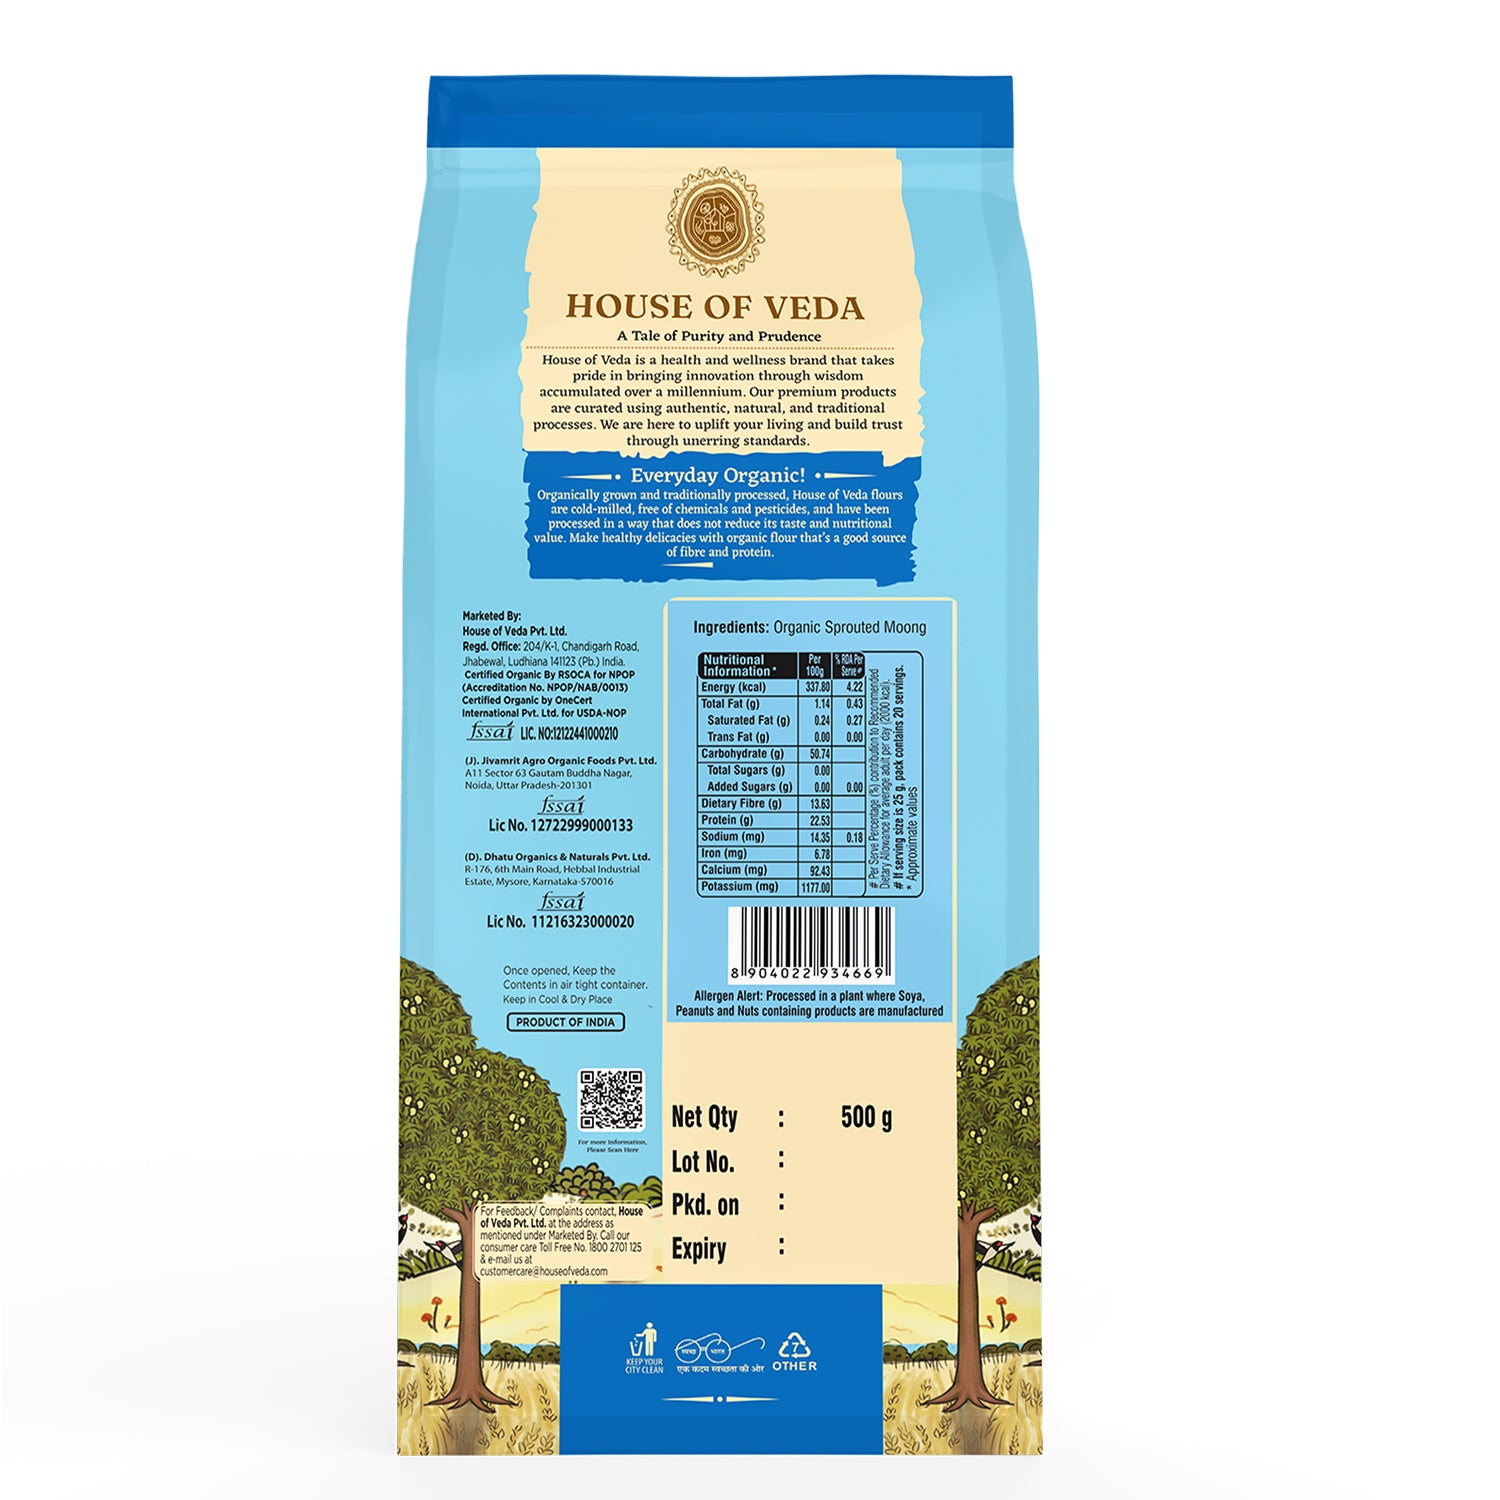 Organic Sprouted Moong Flour 500g